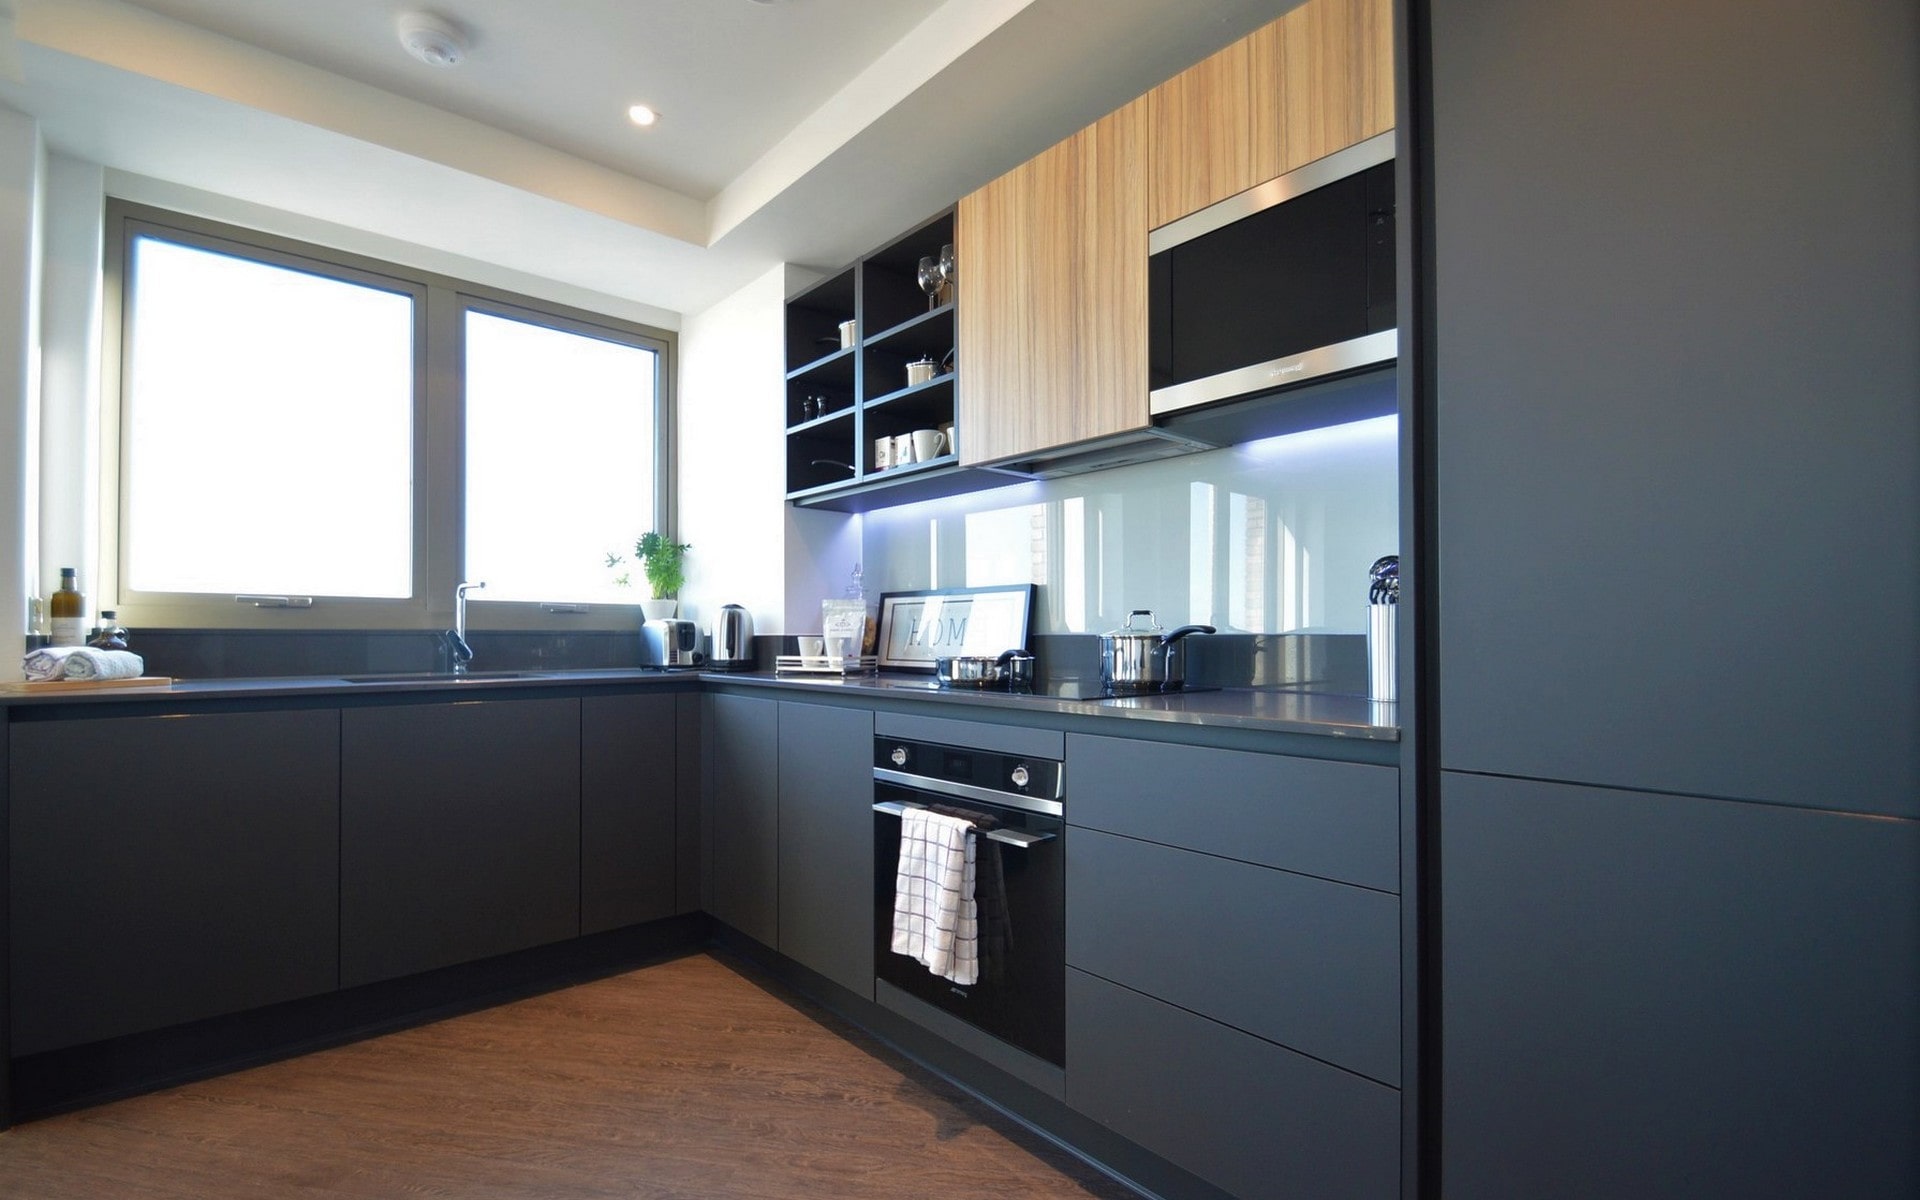 Example of a Kitchen at Mount Anvil's Royal Docks West